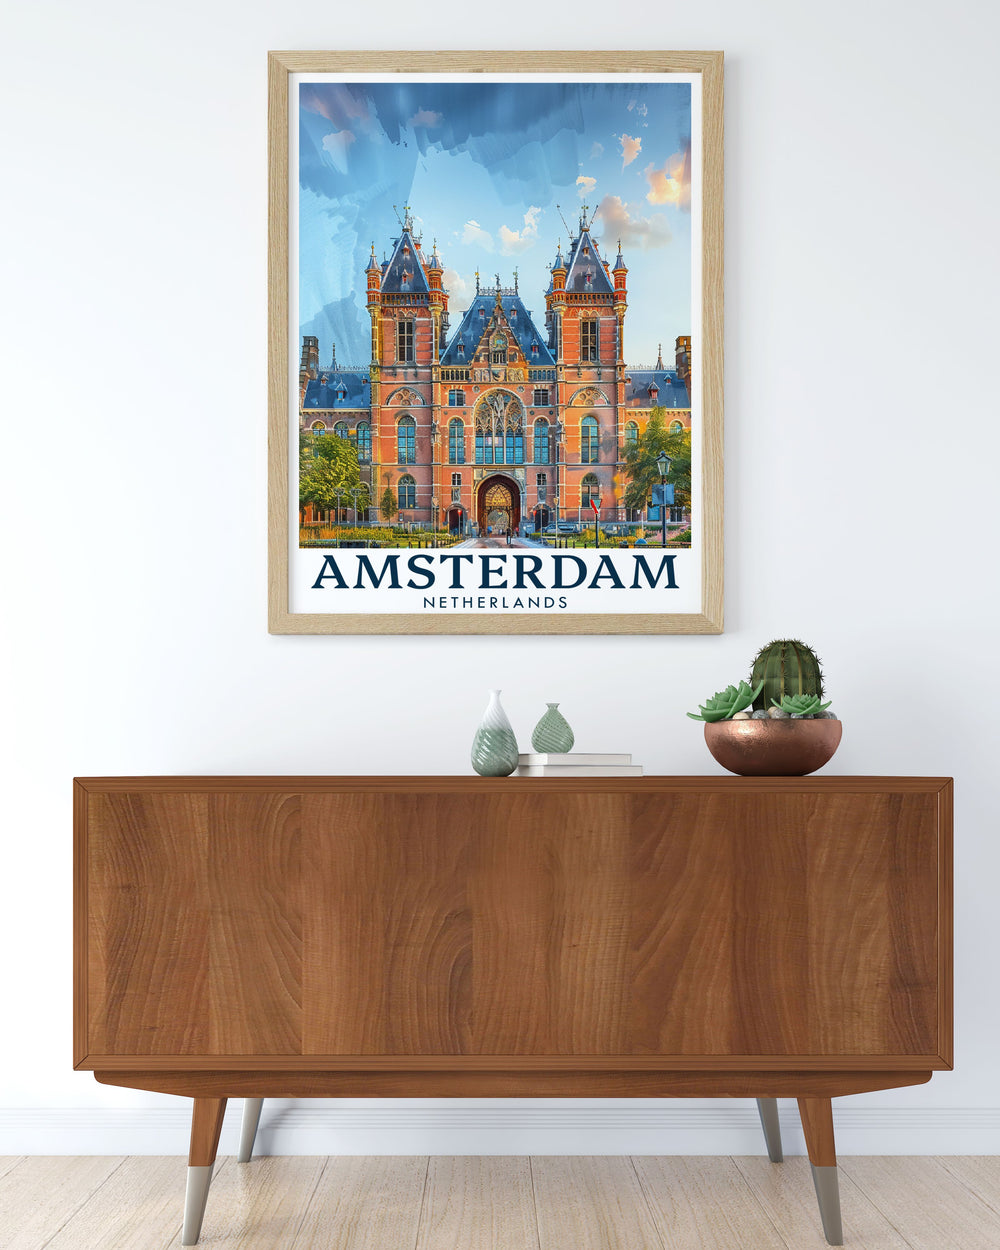 Captivating Amsterdam poster showcasing the Rijksmuseum with fine line details. This Amsterdam photo is a must have for those who appreciate detailed city prints. The Amsterdam art print brings the architectural beauty of the city into your living space.